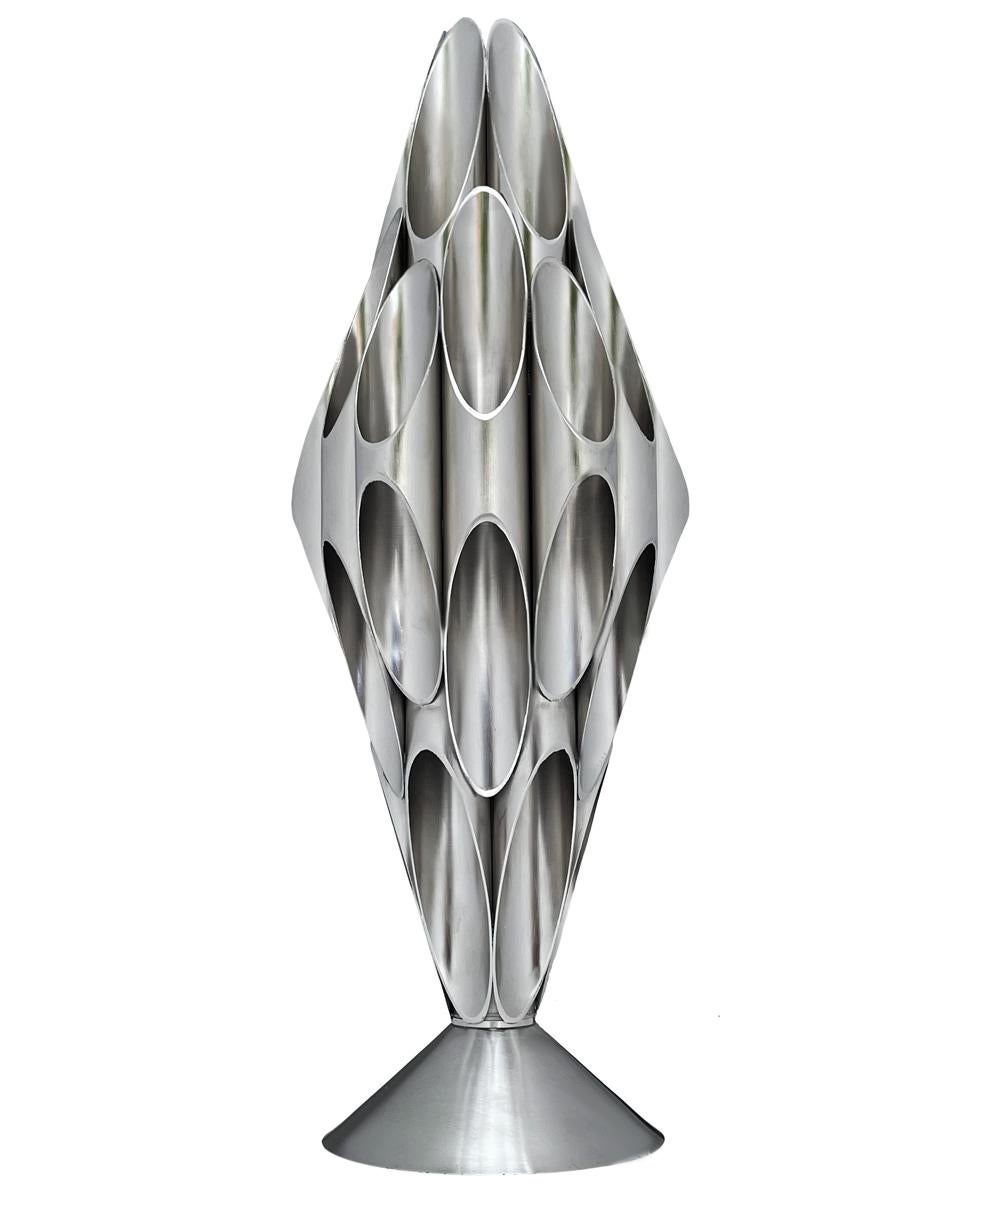 A sculptural table lamp made by Designline. It features heavy chrome construction with sliced nickel tubes. It takes one standard bulb up to 100 watts. It has a very long cord with the on / off switch.